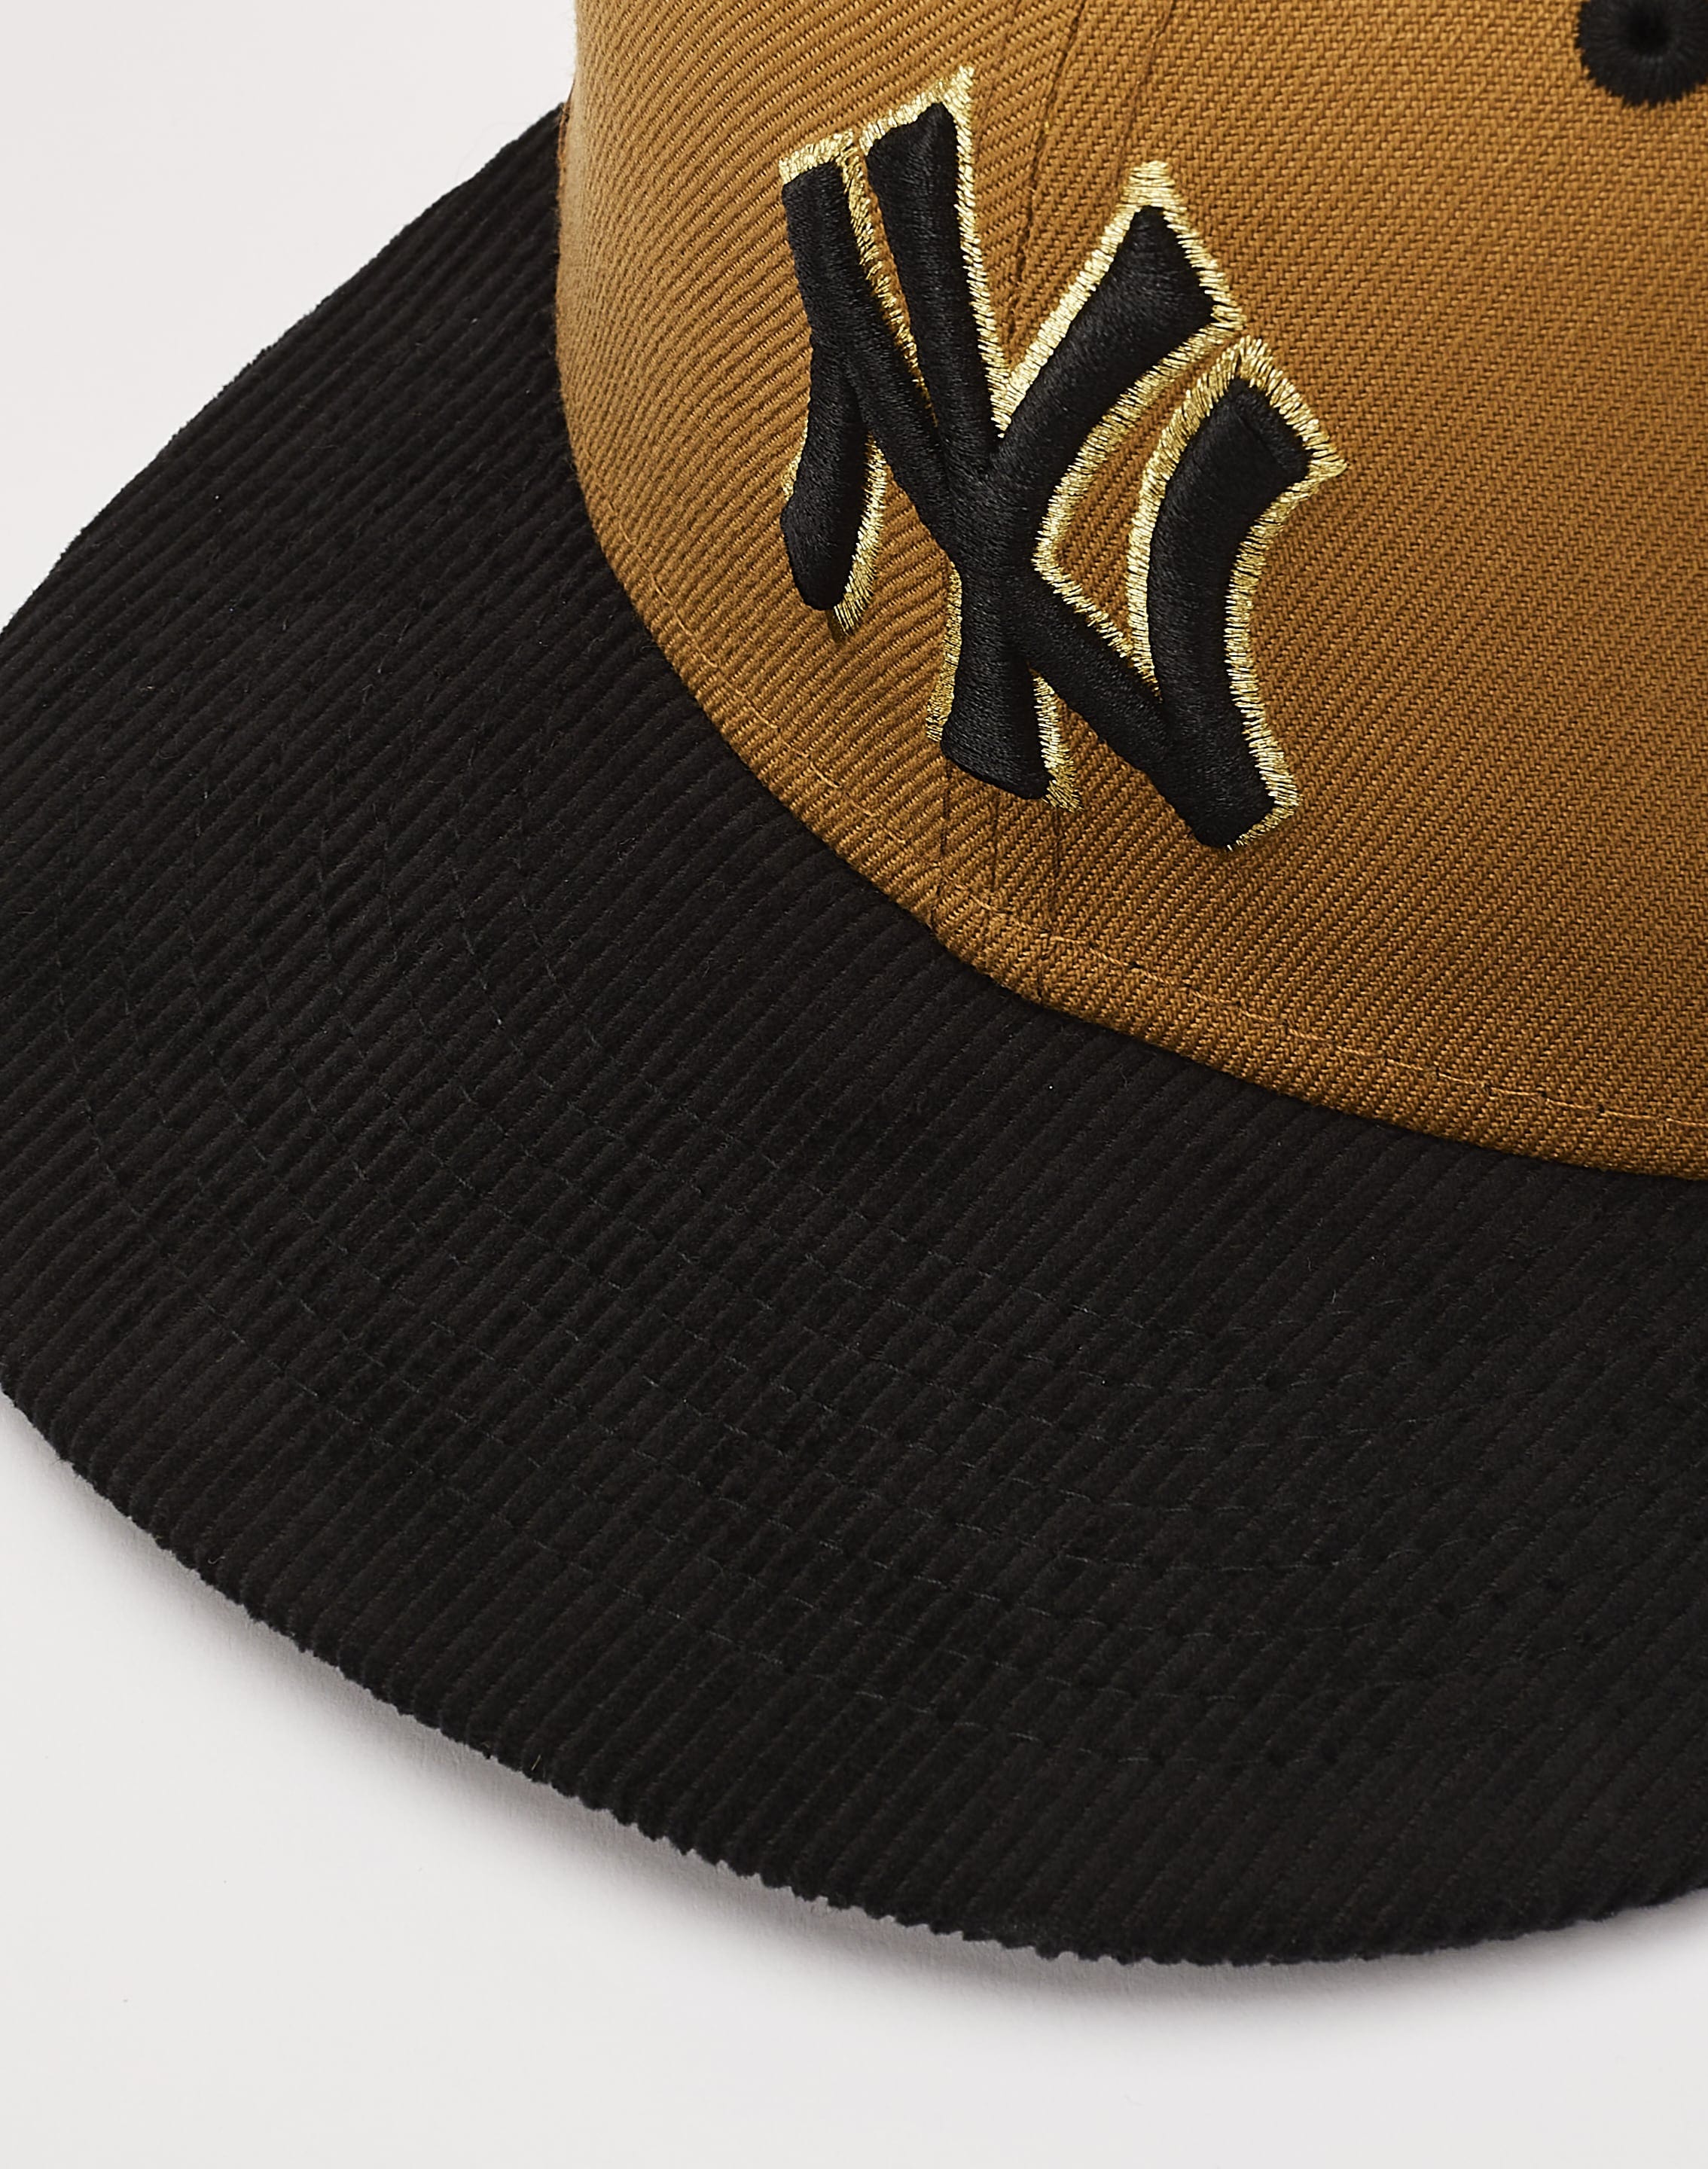 New Era New York Yankees Suede 9Fifty Snapback Hat – DTLR